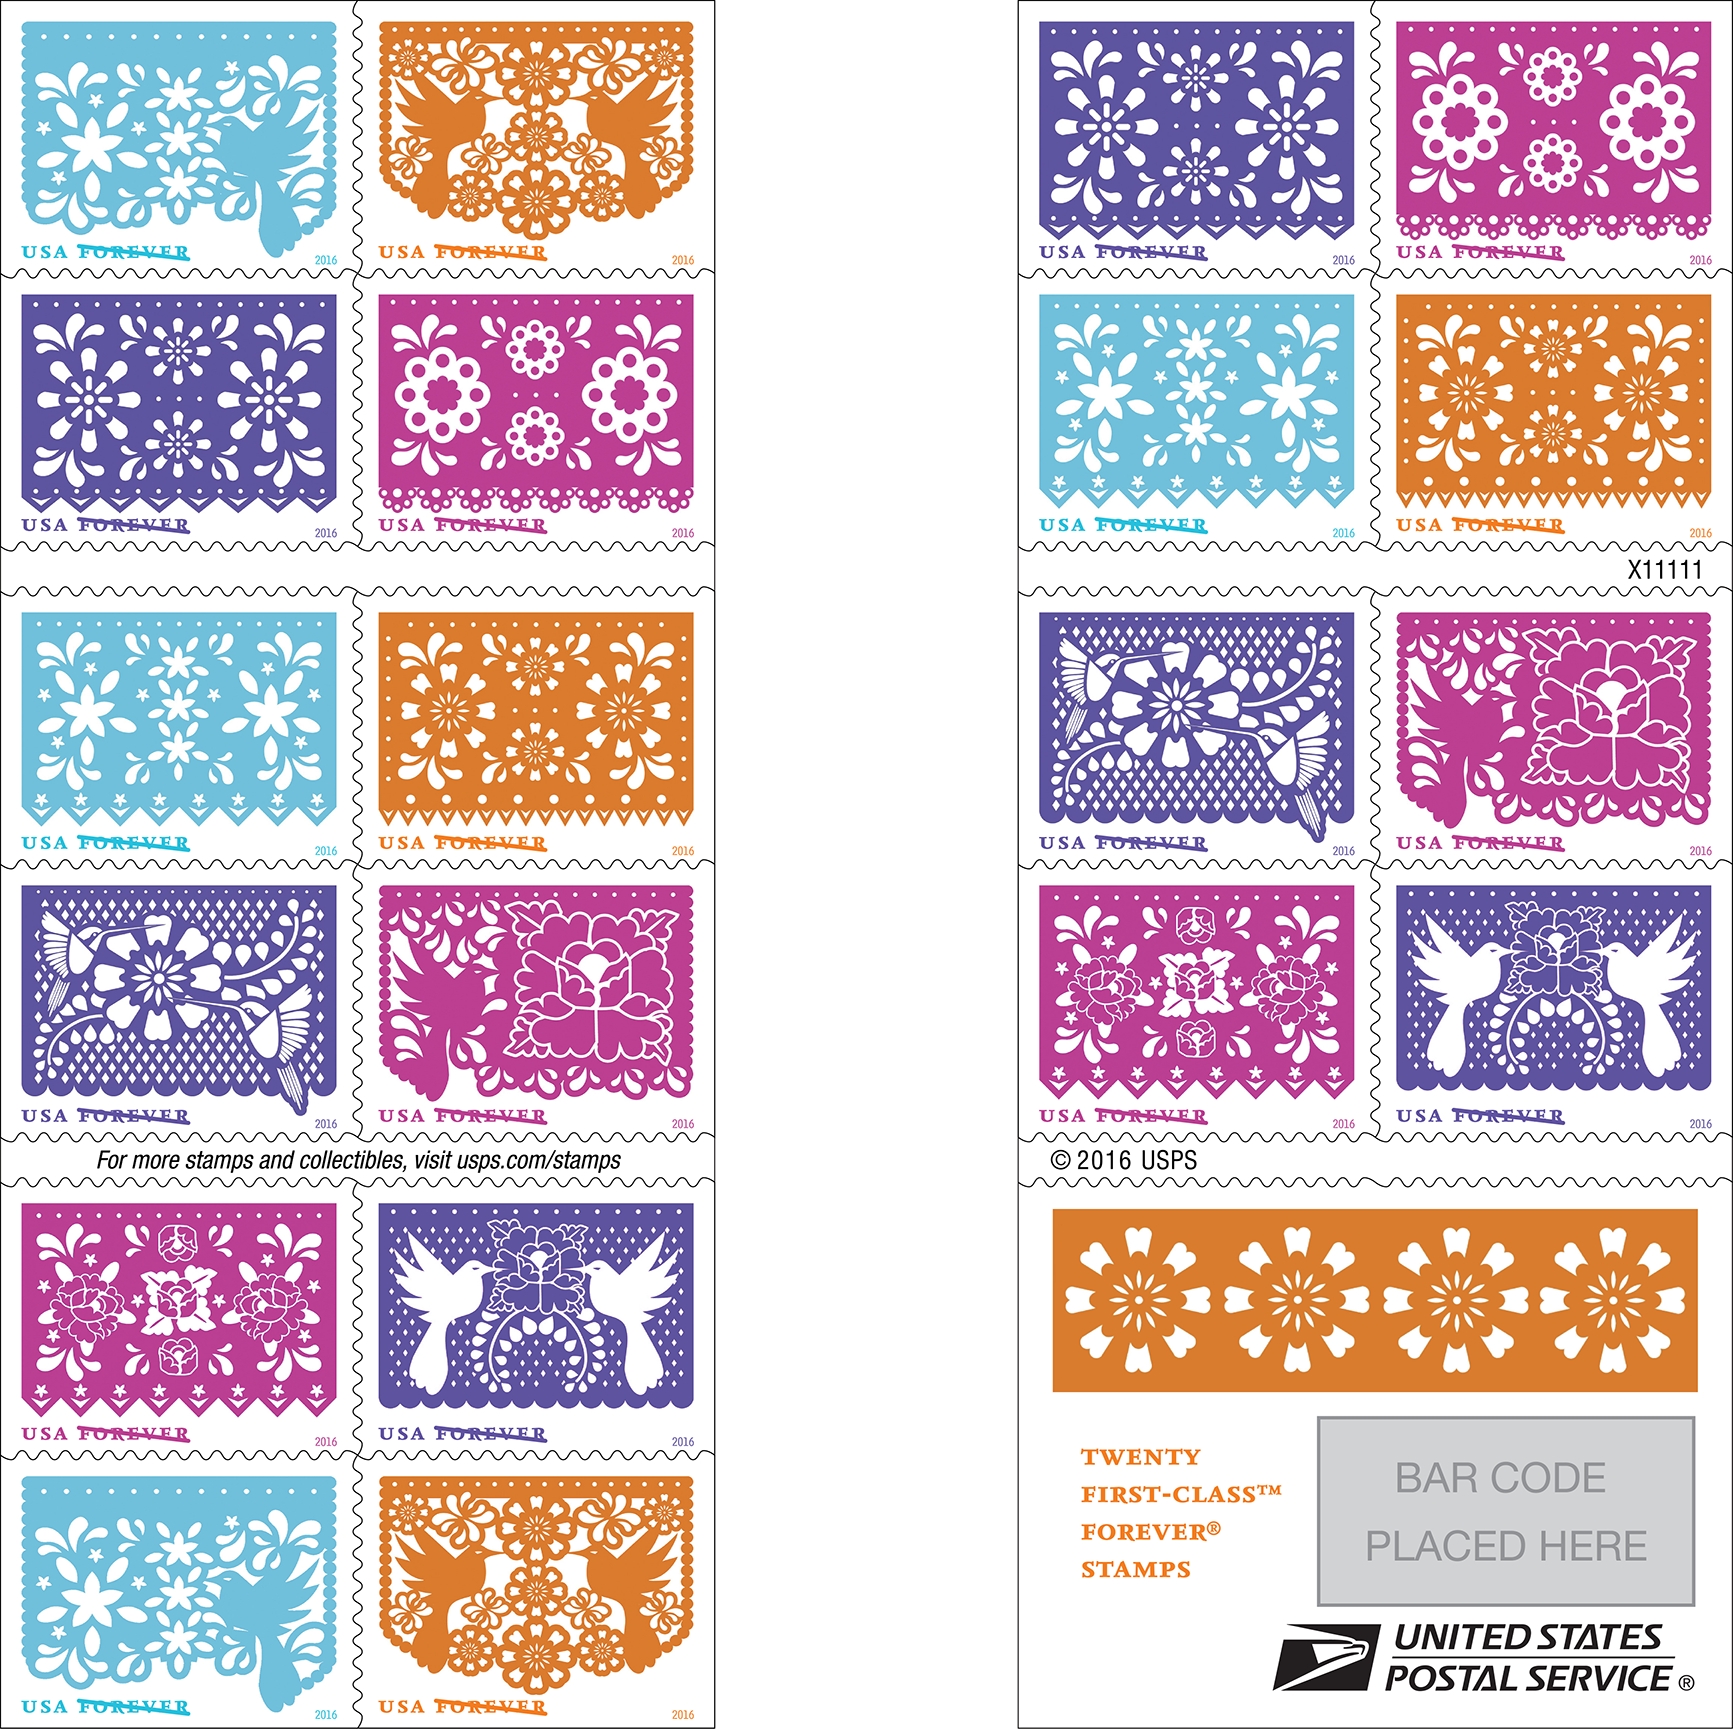 New forever stamps booklet